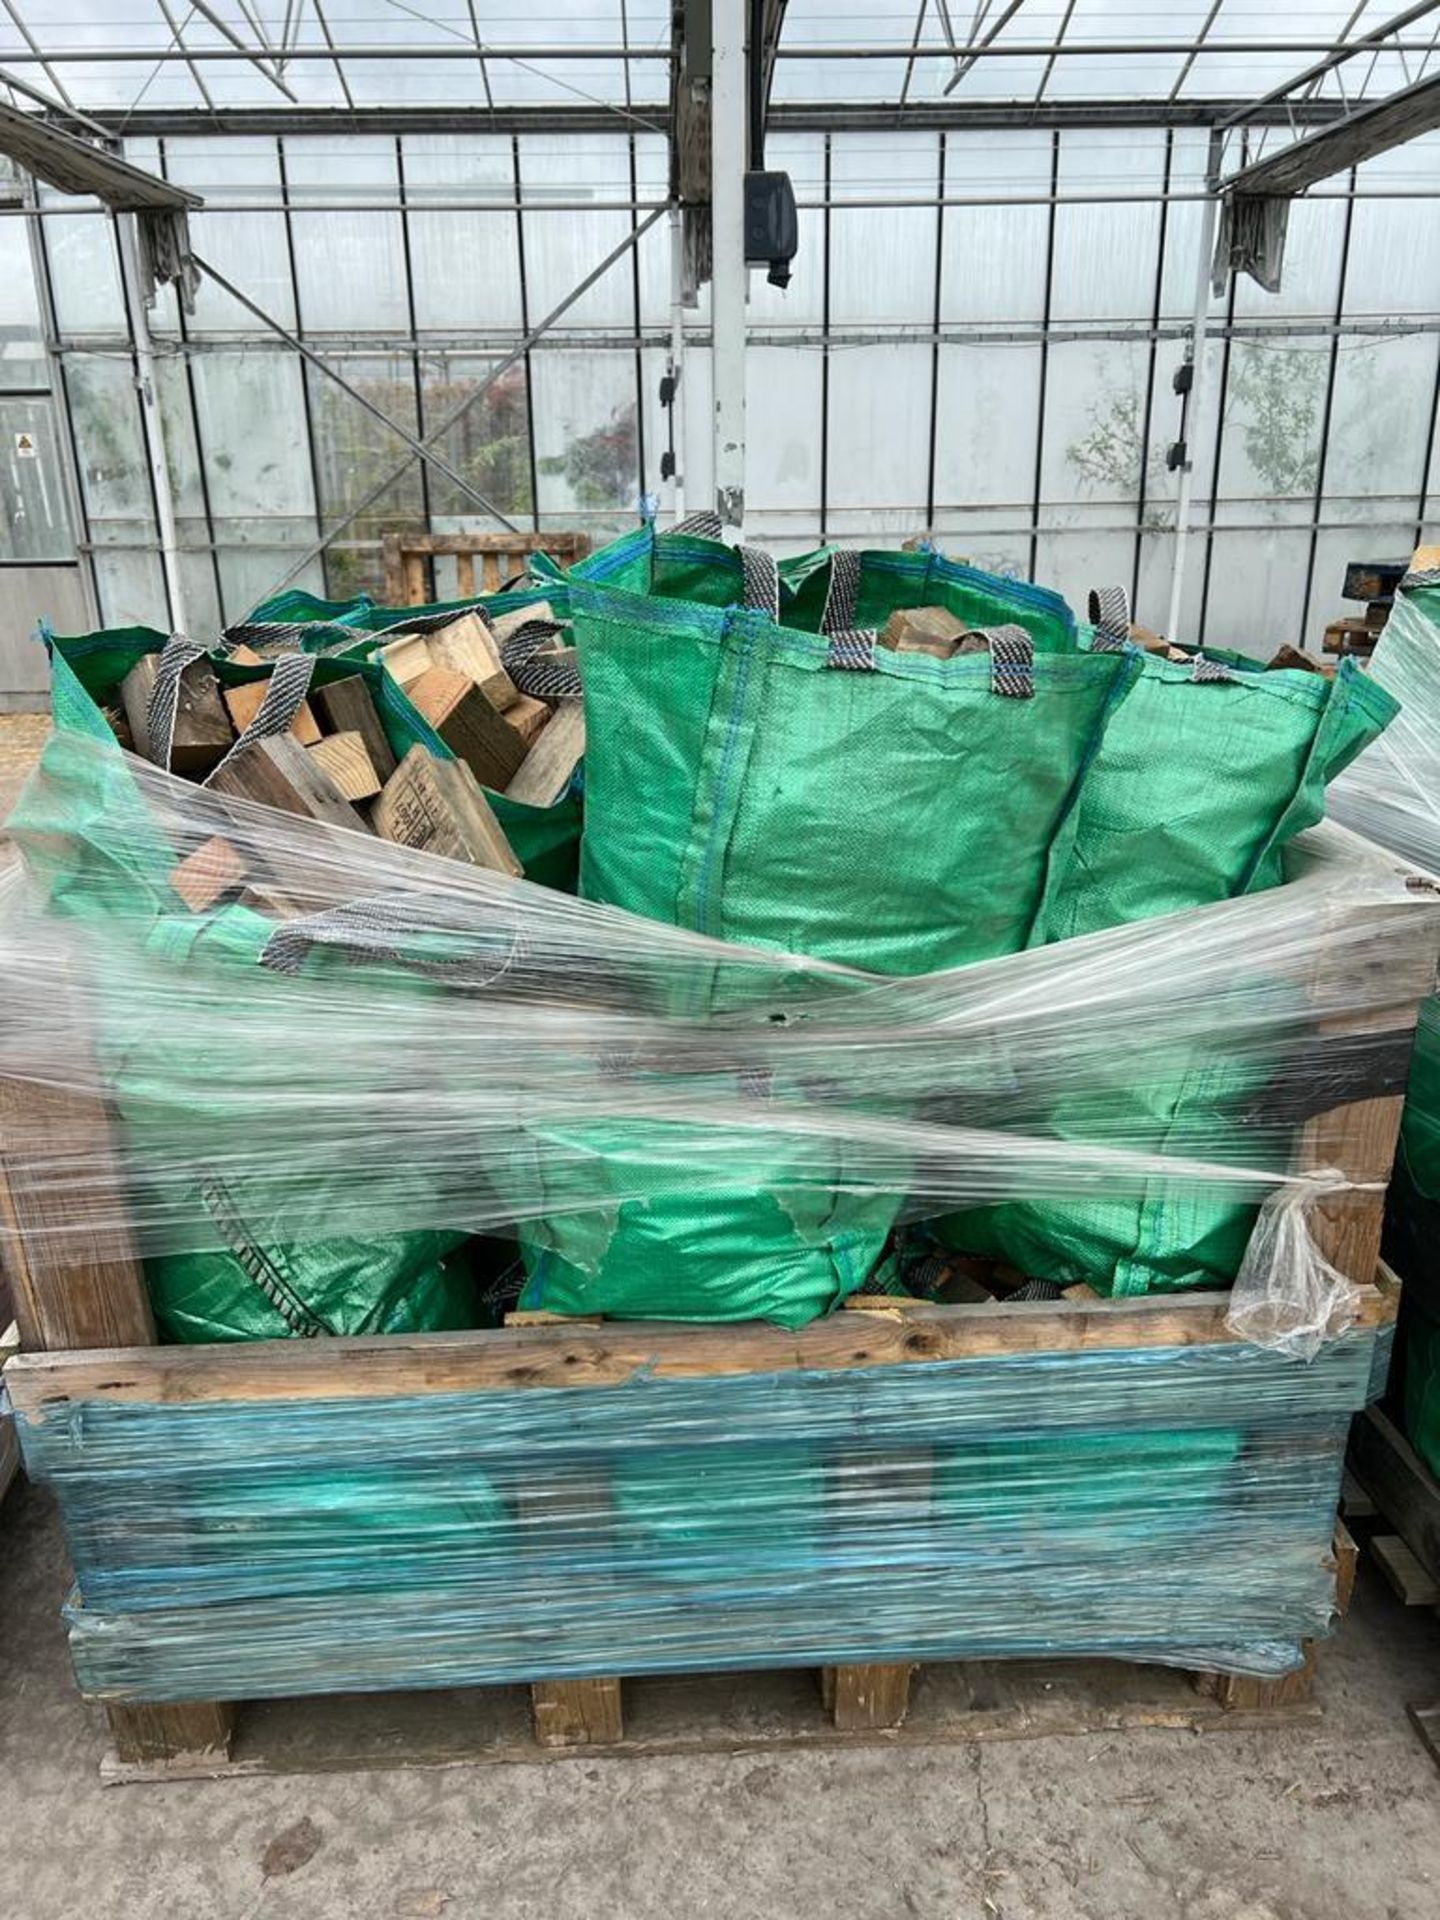 24 BAGS OF OFF CUTS NO VAT PLEASE NOTE DOES NOT INCLUDE THE PALLET BOX NO VAT